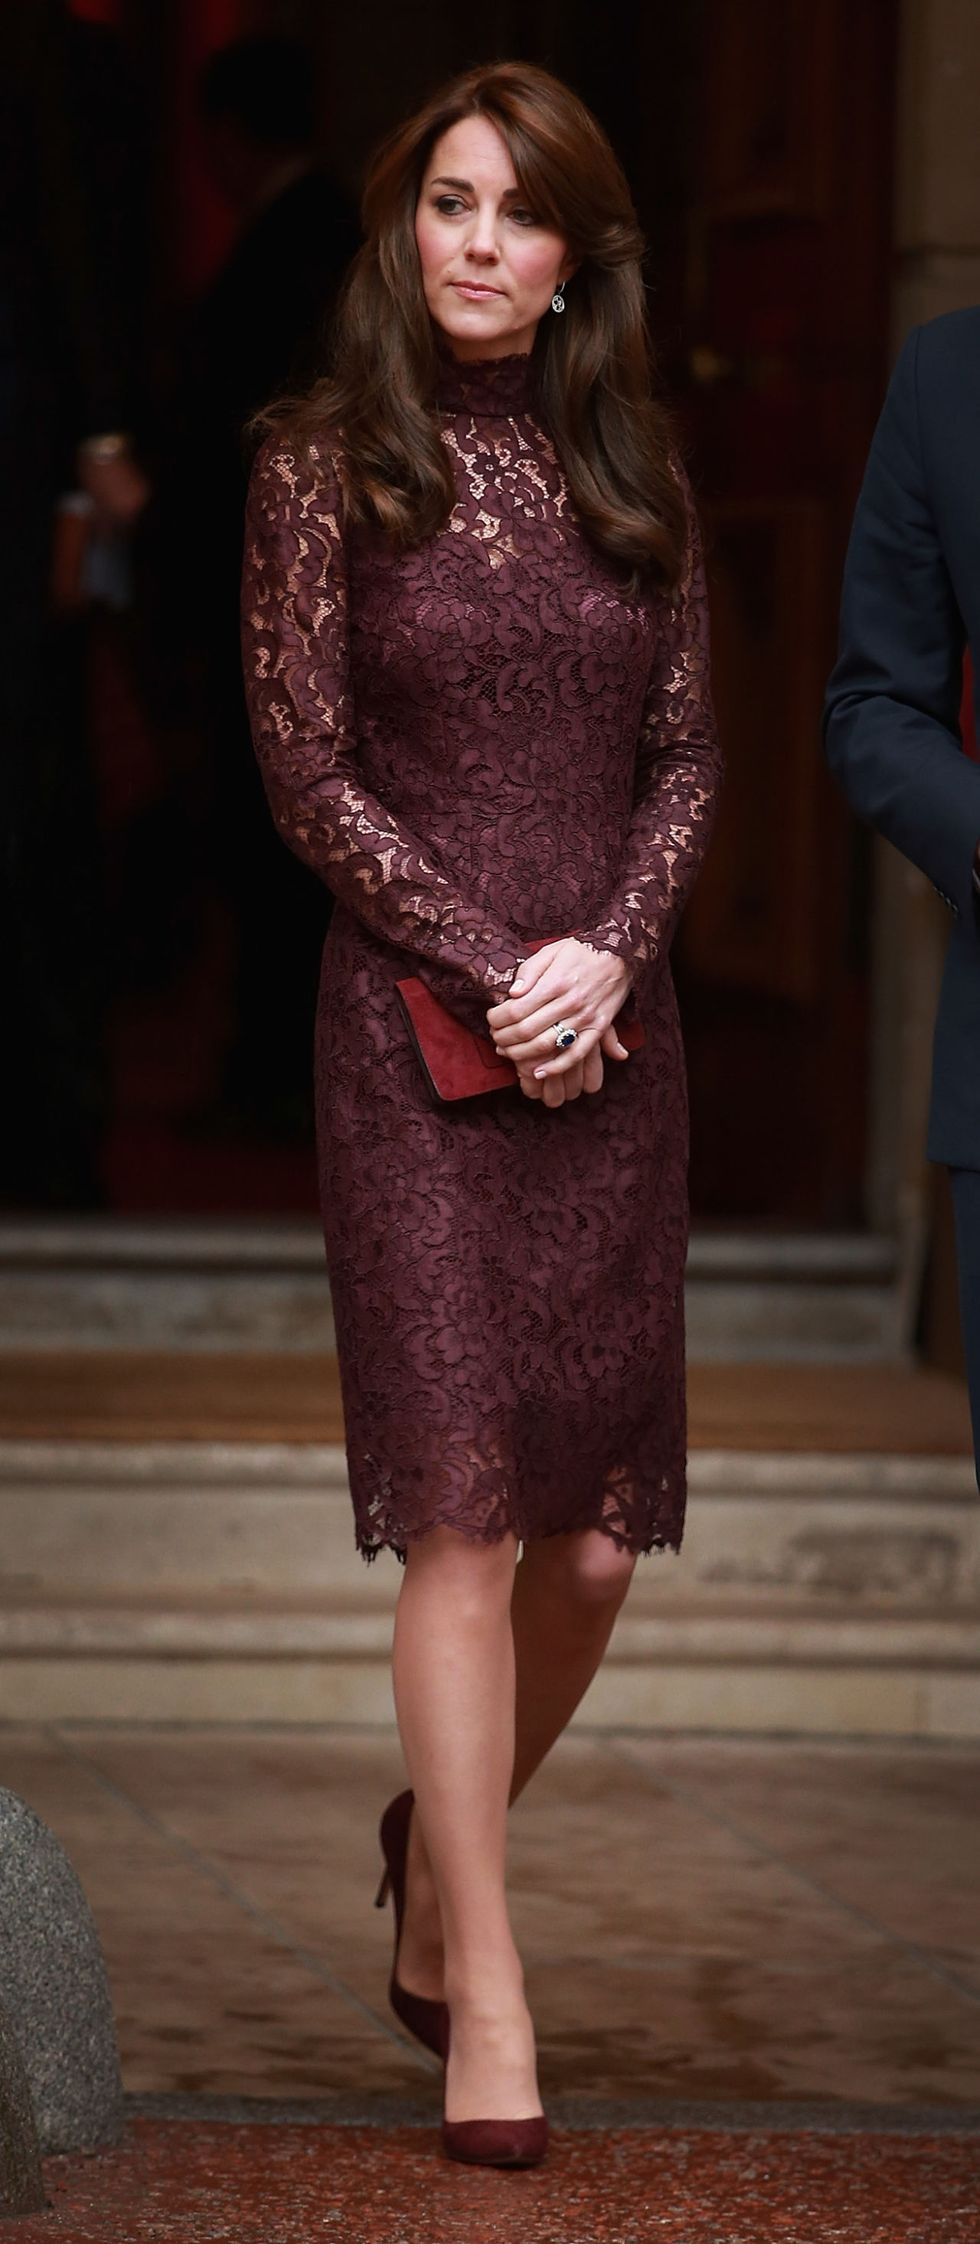 LONDON, ENGLAND - OCTOBER 21: Catherine, Duchess of Cambridge walks out to welcome the President of the Peoples Republic of China, Mr Xi Jinping and his wife, Madame Peng Liyuan to a GREAT Britain Creative Event at Lancaster House on October 21, 2015 in London, England. The President of the Peoples Republic of China, Mr Xi Jinping and his wife, Madame Peng Liyuan, are paying a State Visit to the United Kingdom as guests of The Queen.  They will stay at Buckingham Palace and undertake engagements in London and Manchester. The last state visit paid by a Chinese President to the UK was Hu Jintao in 2005.  (Photo by Chris Jackson/Getty Images)